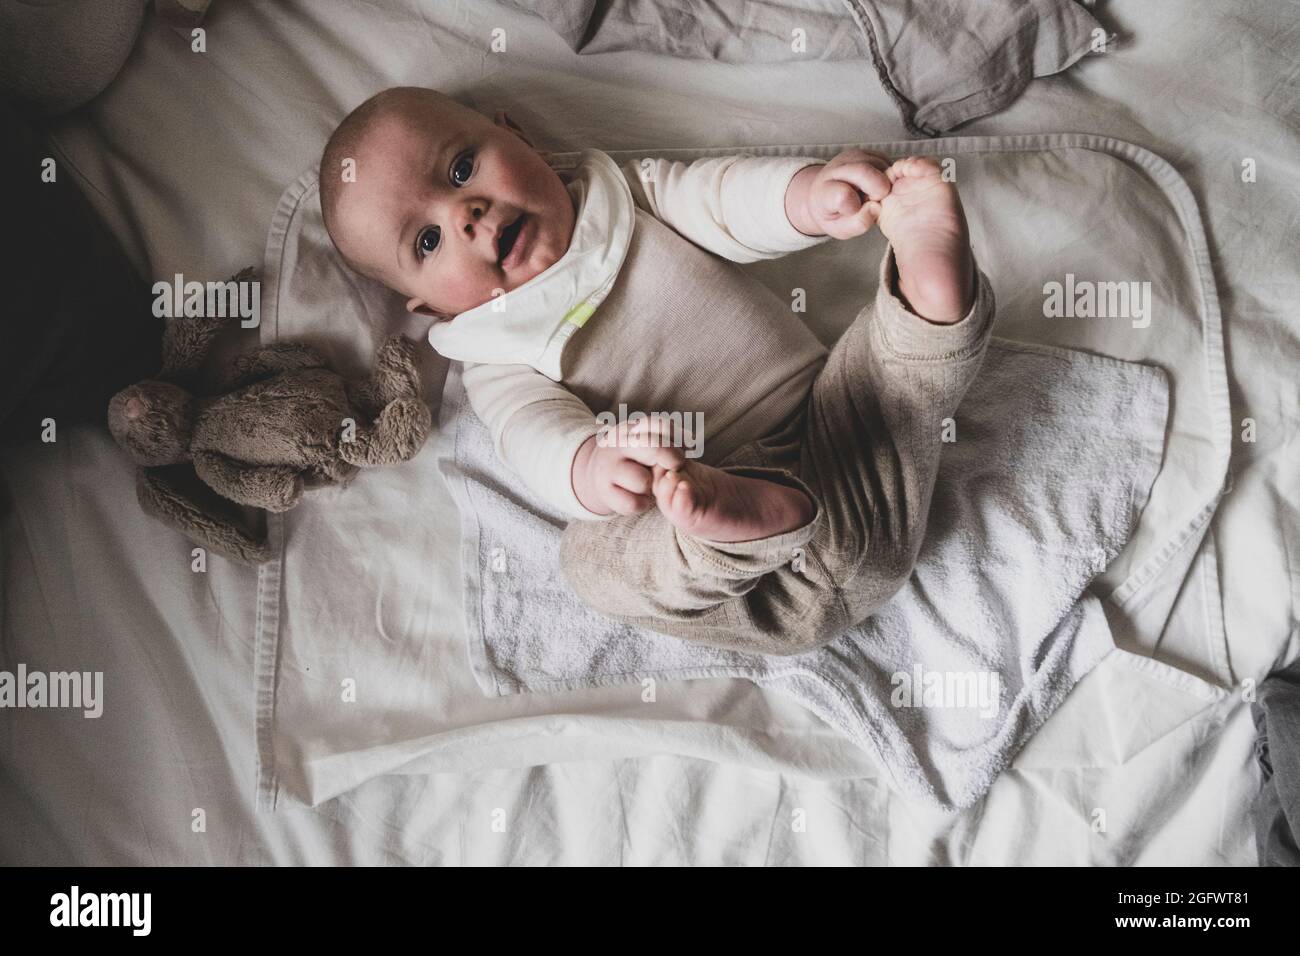 High angle view of baby lying on bed Stock Photo